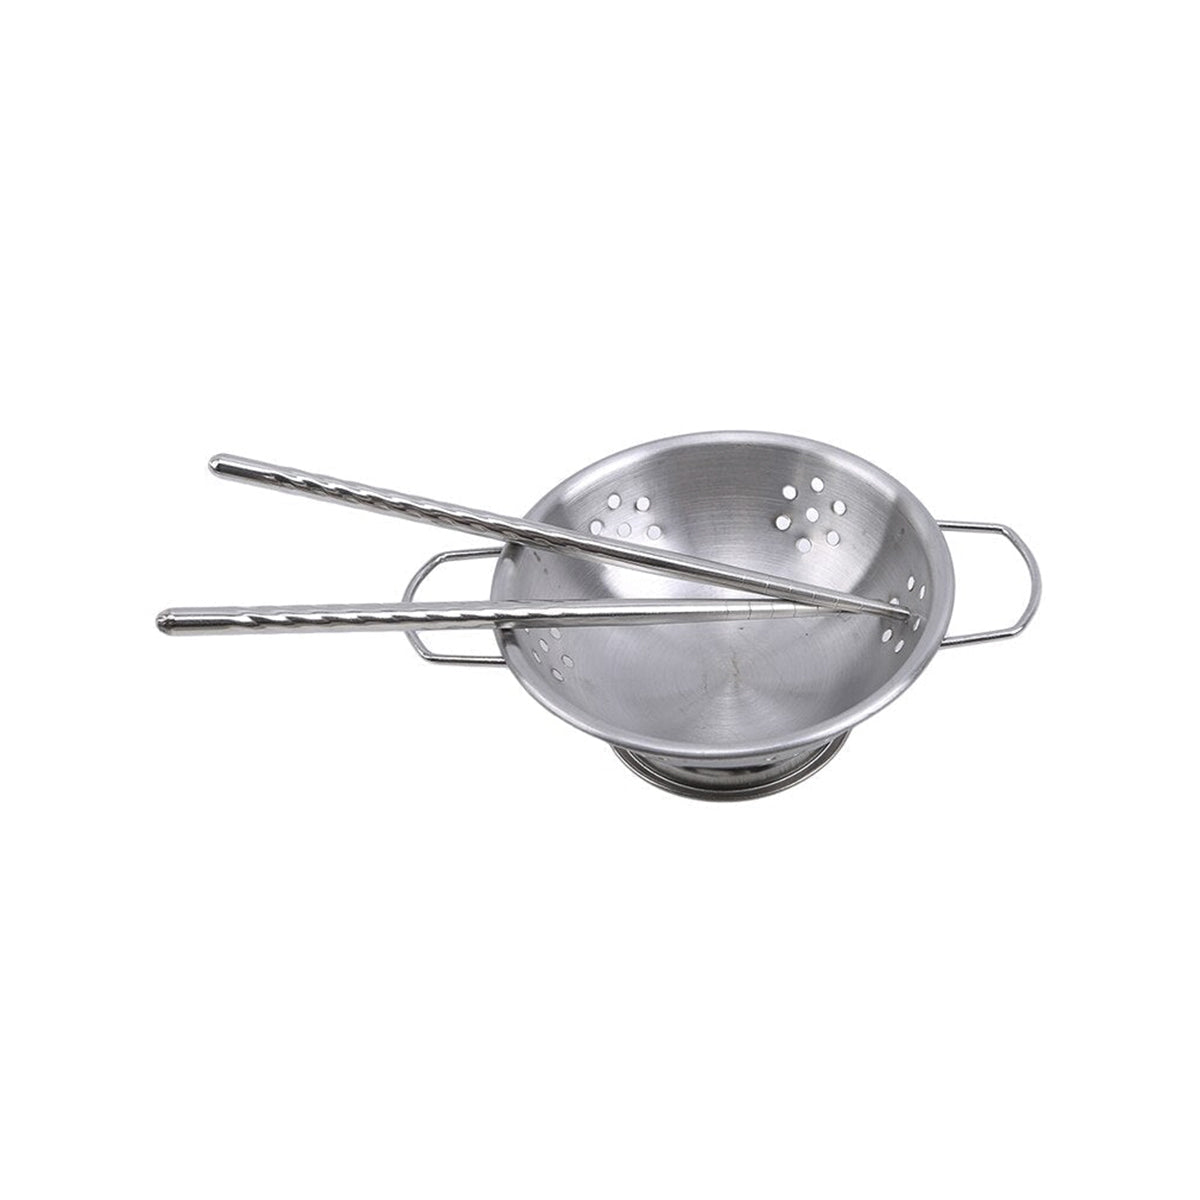 Stainless Steel Cookware 16pcs/Set